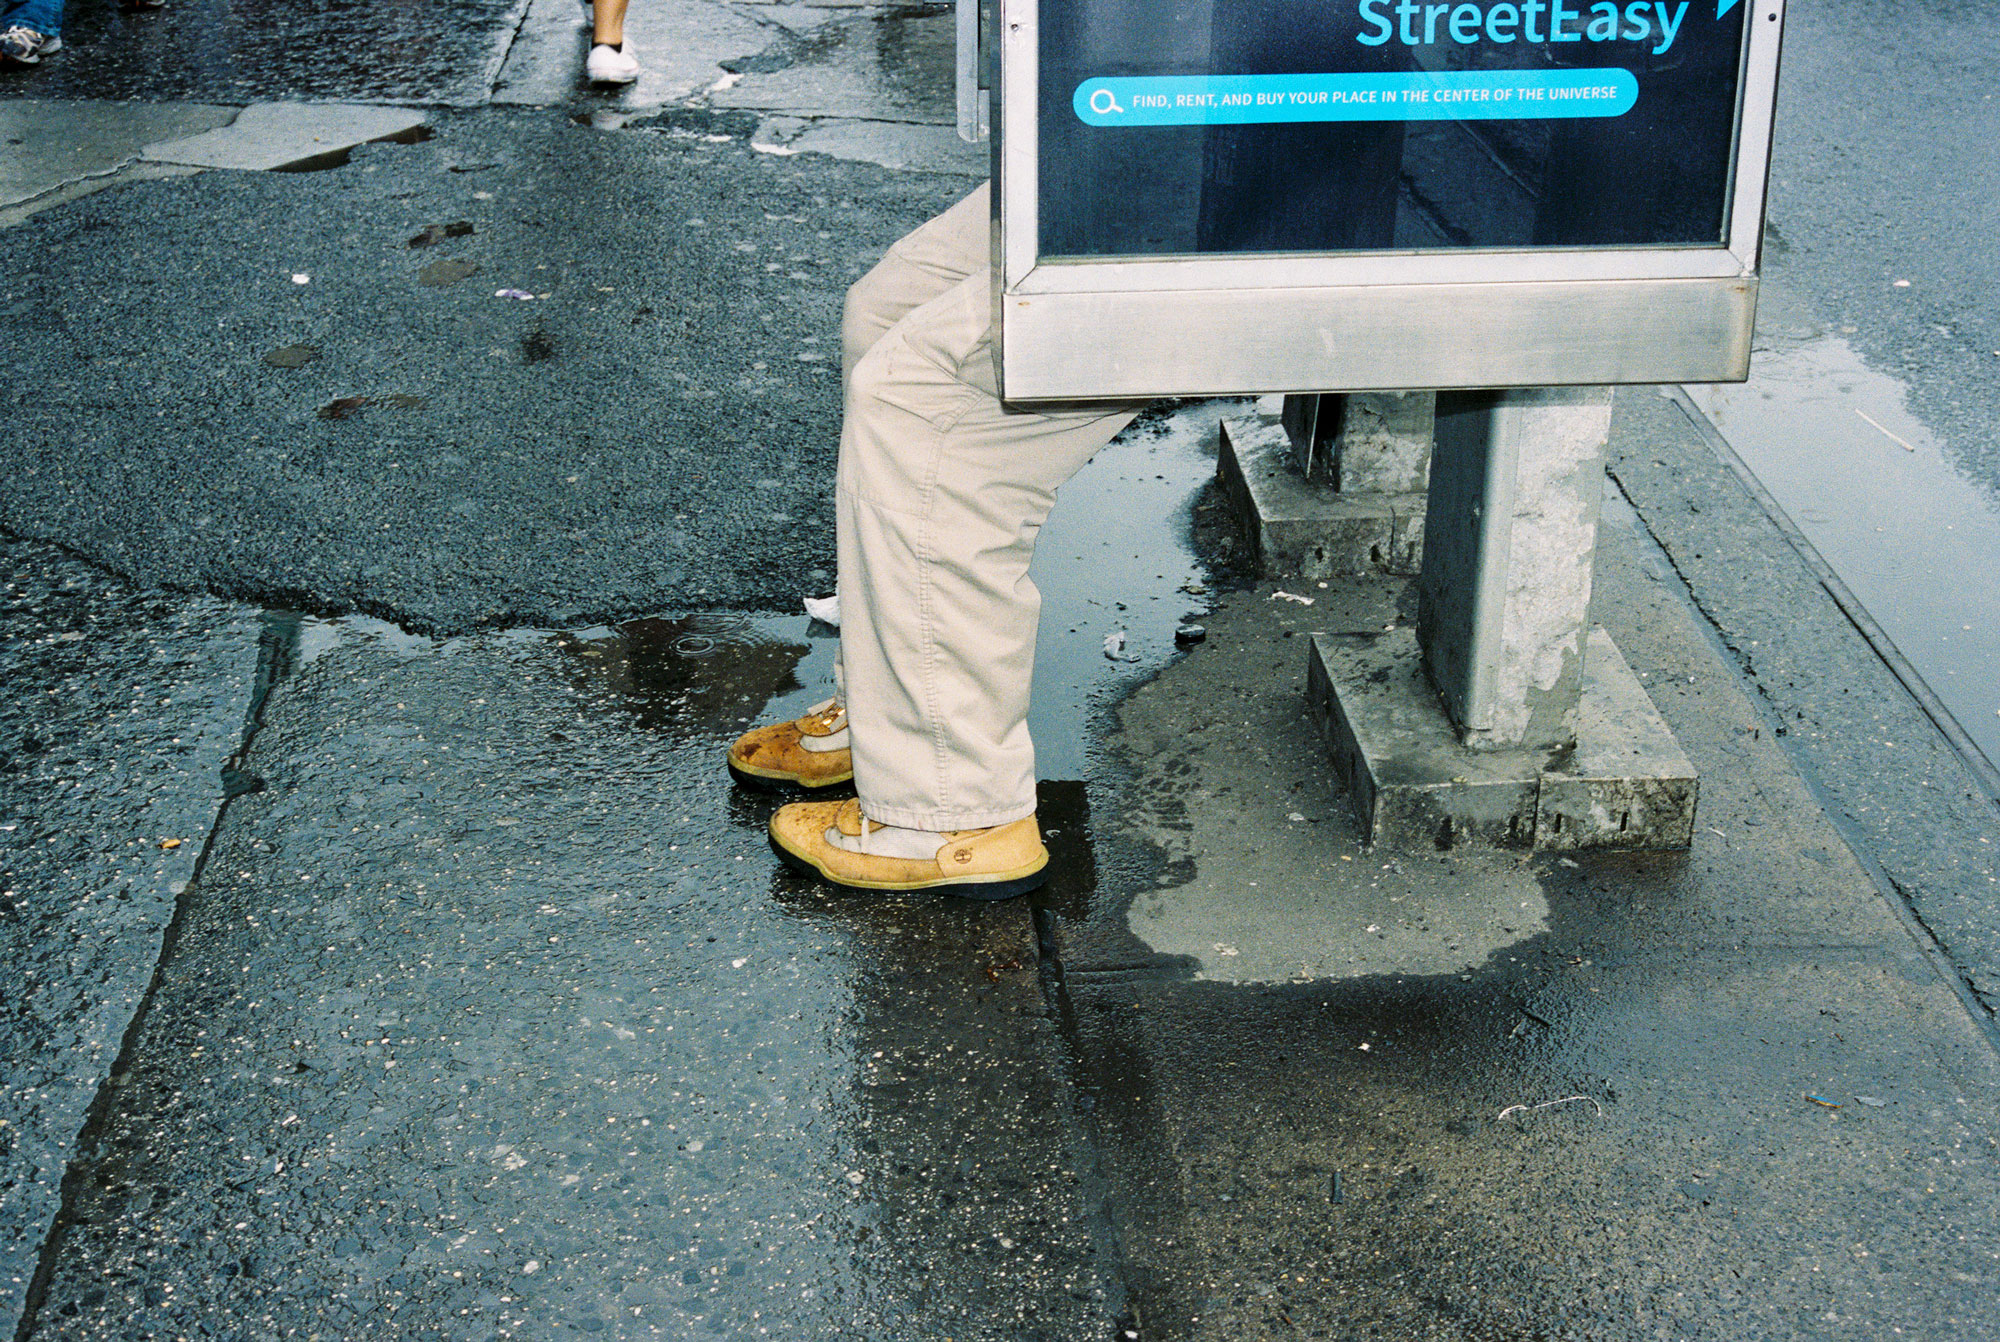 AN-IMAGE-OF-FEET-HANGING-OUT-OF-A-PHONE-BOOTH-IN-THE-STREETS-OF-NEW-YORK-CITY